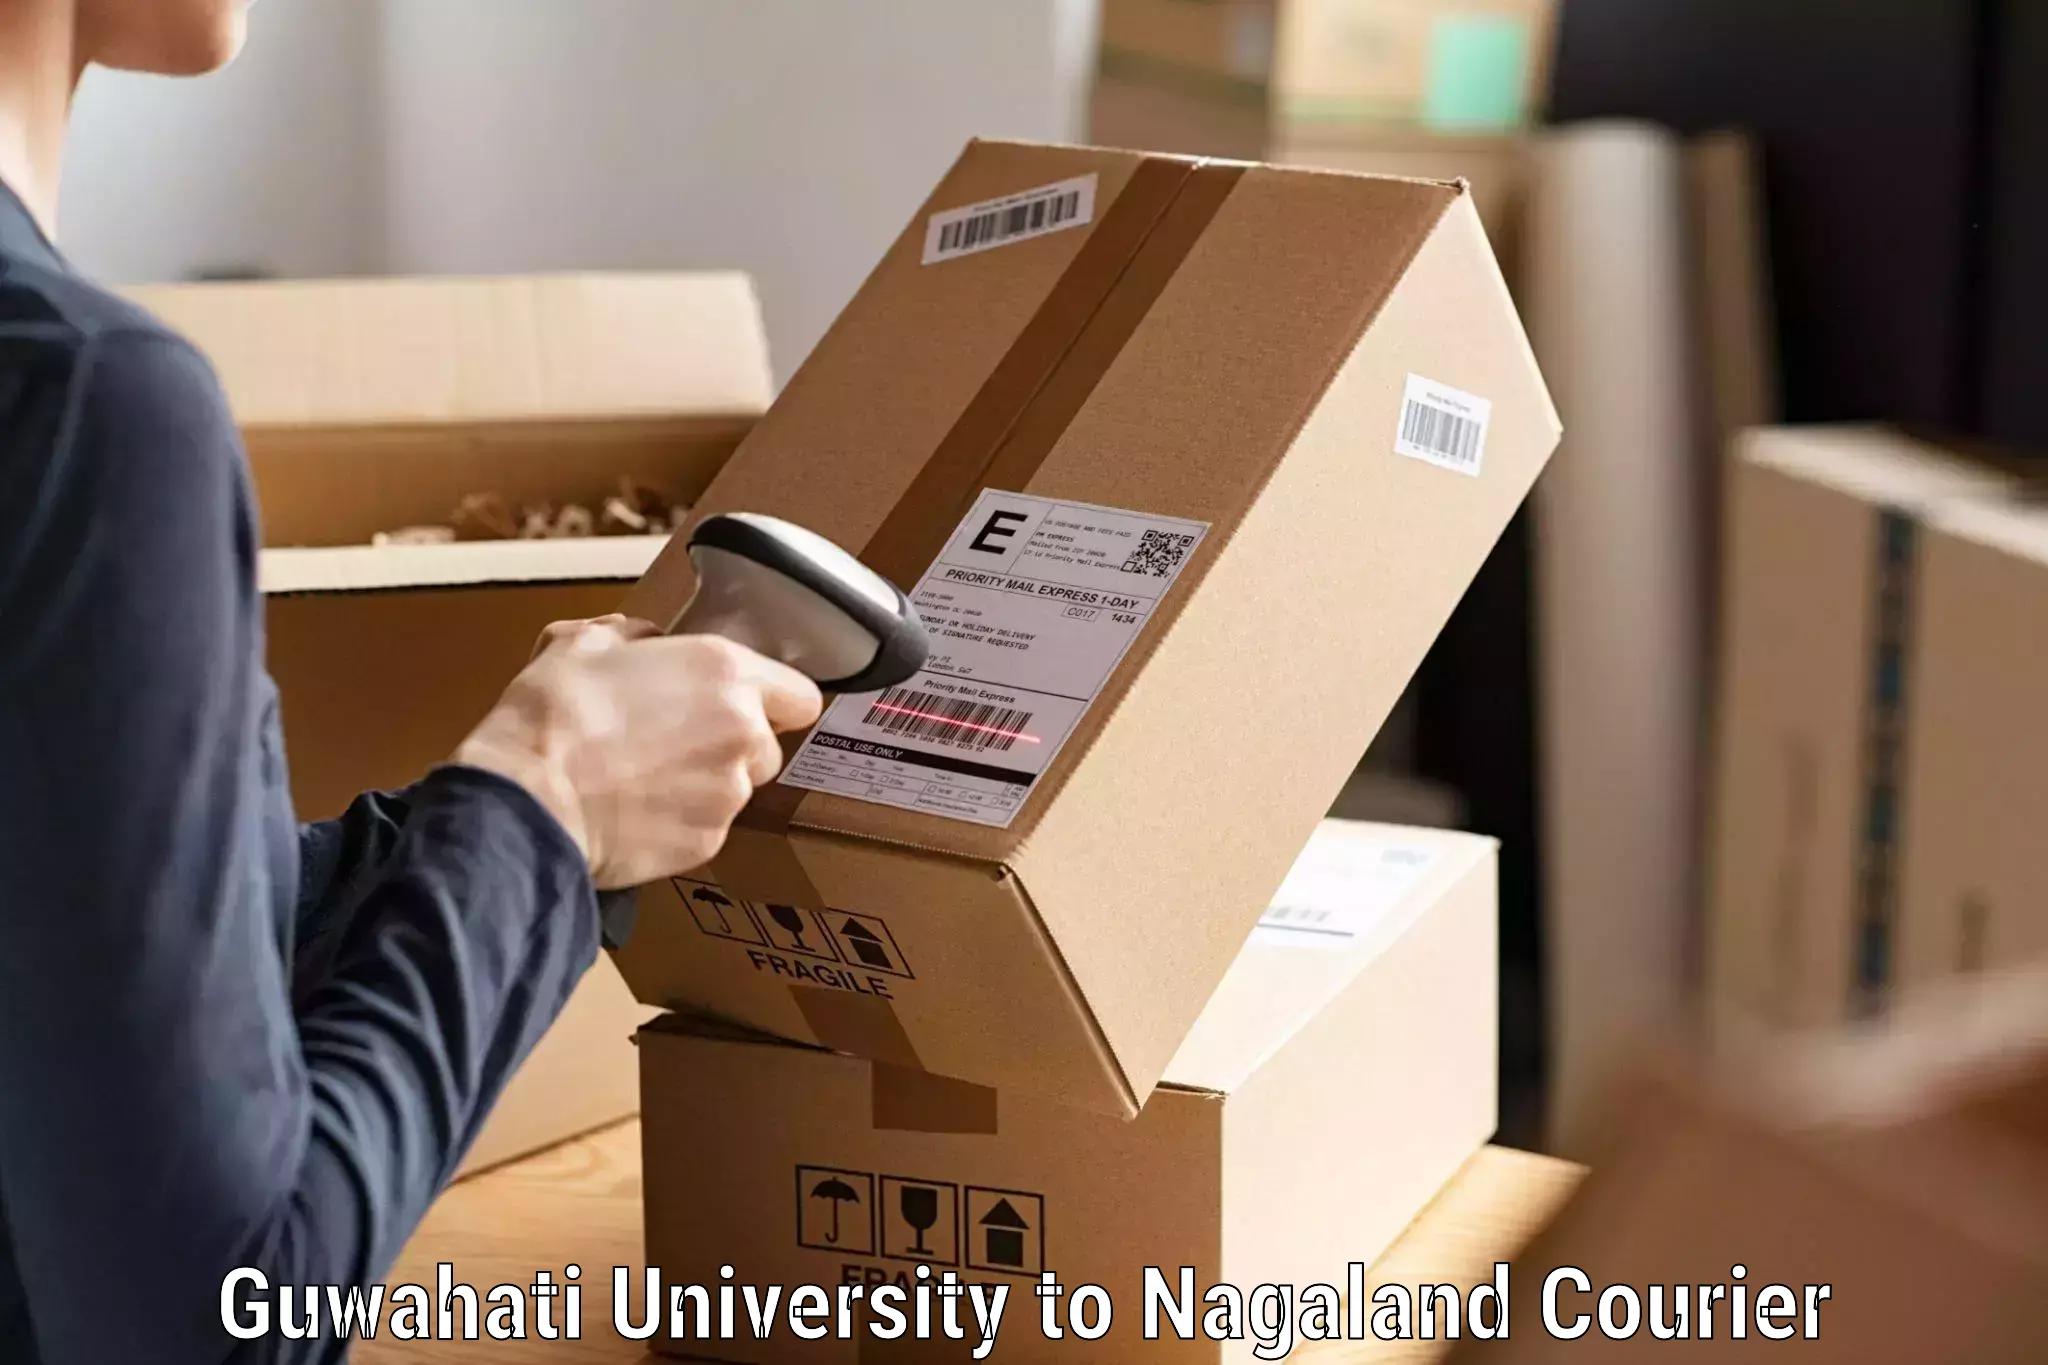 Courier service booking Guwahati University to NIT Nagaland